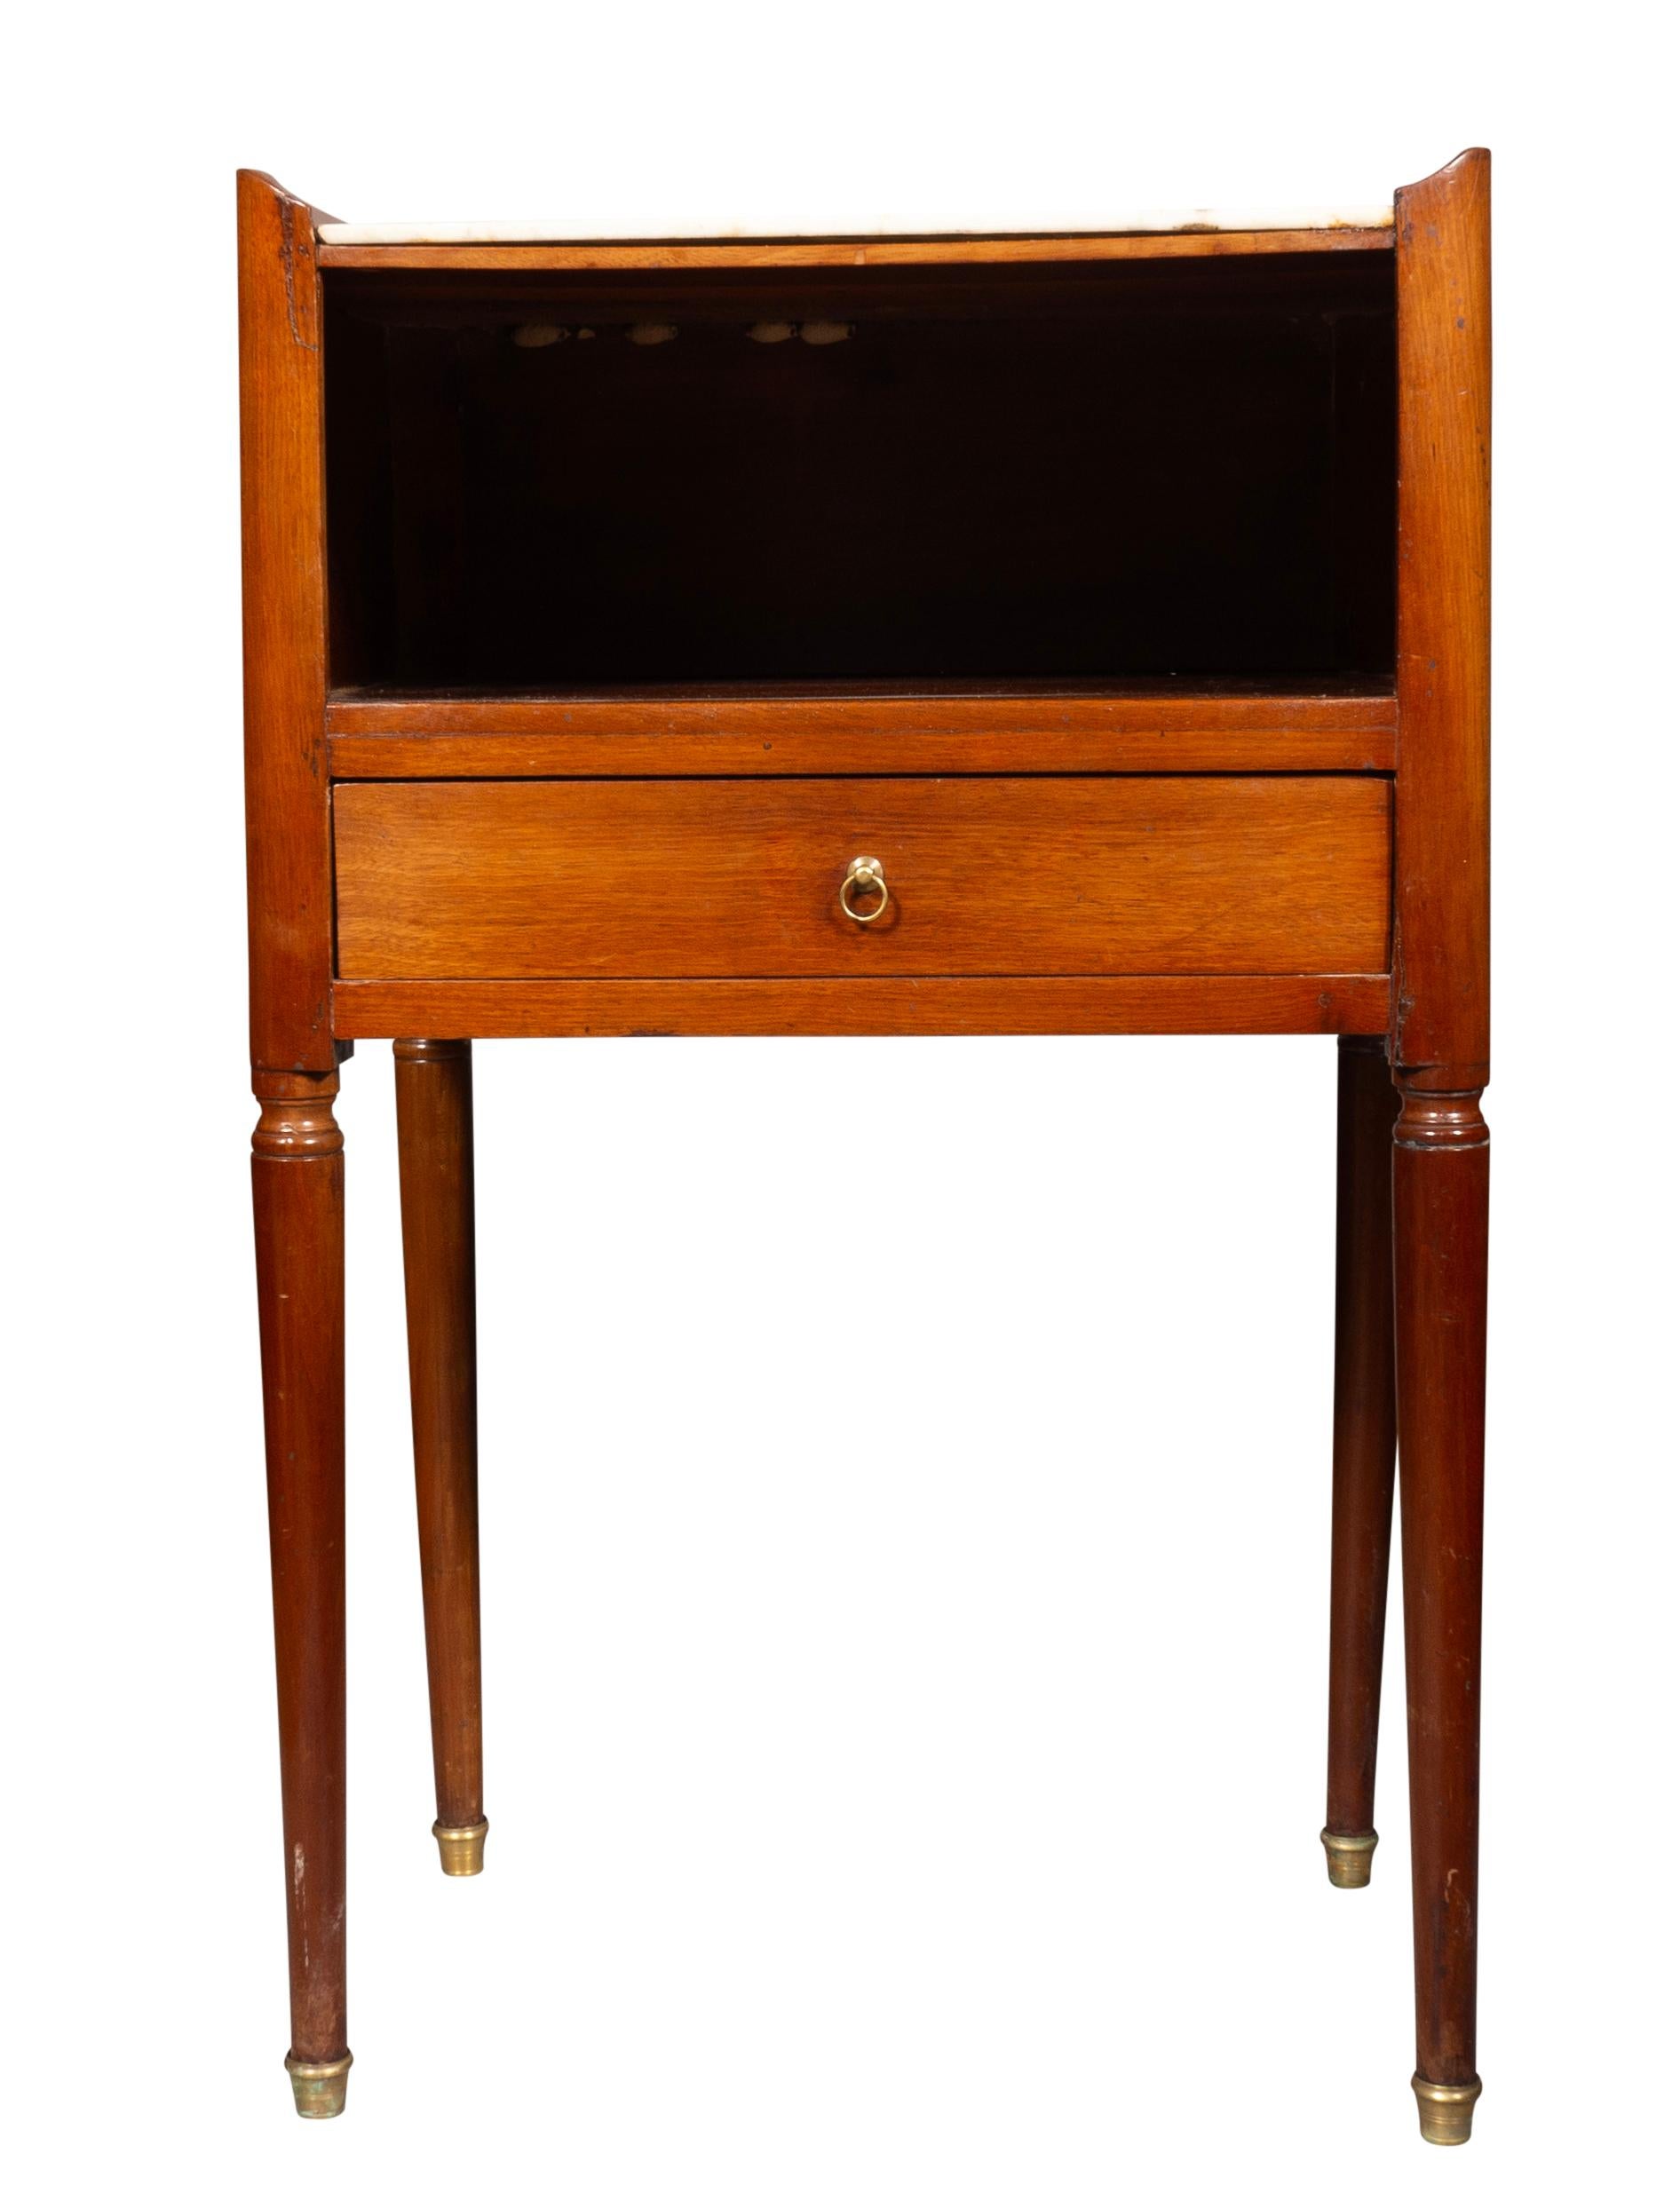 Rectangular with white marble top over a compartment and drawer and with turned tapered legs.